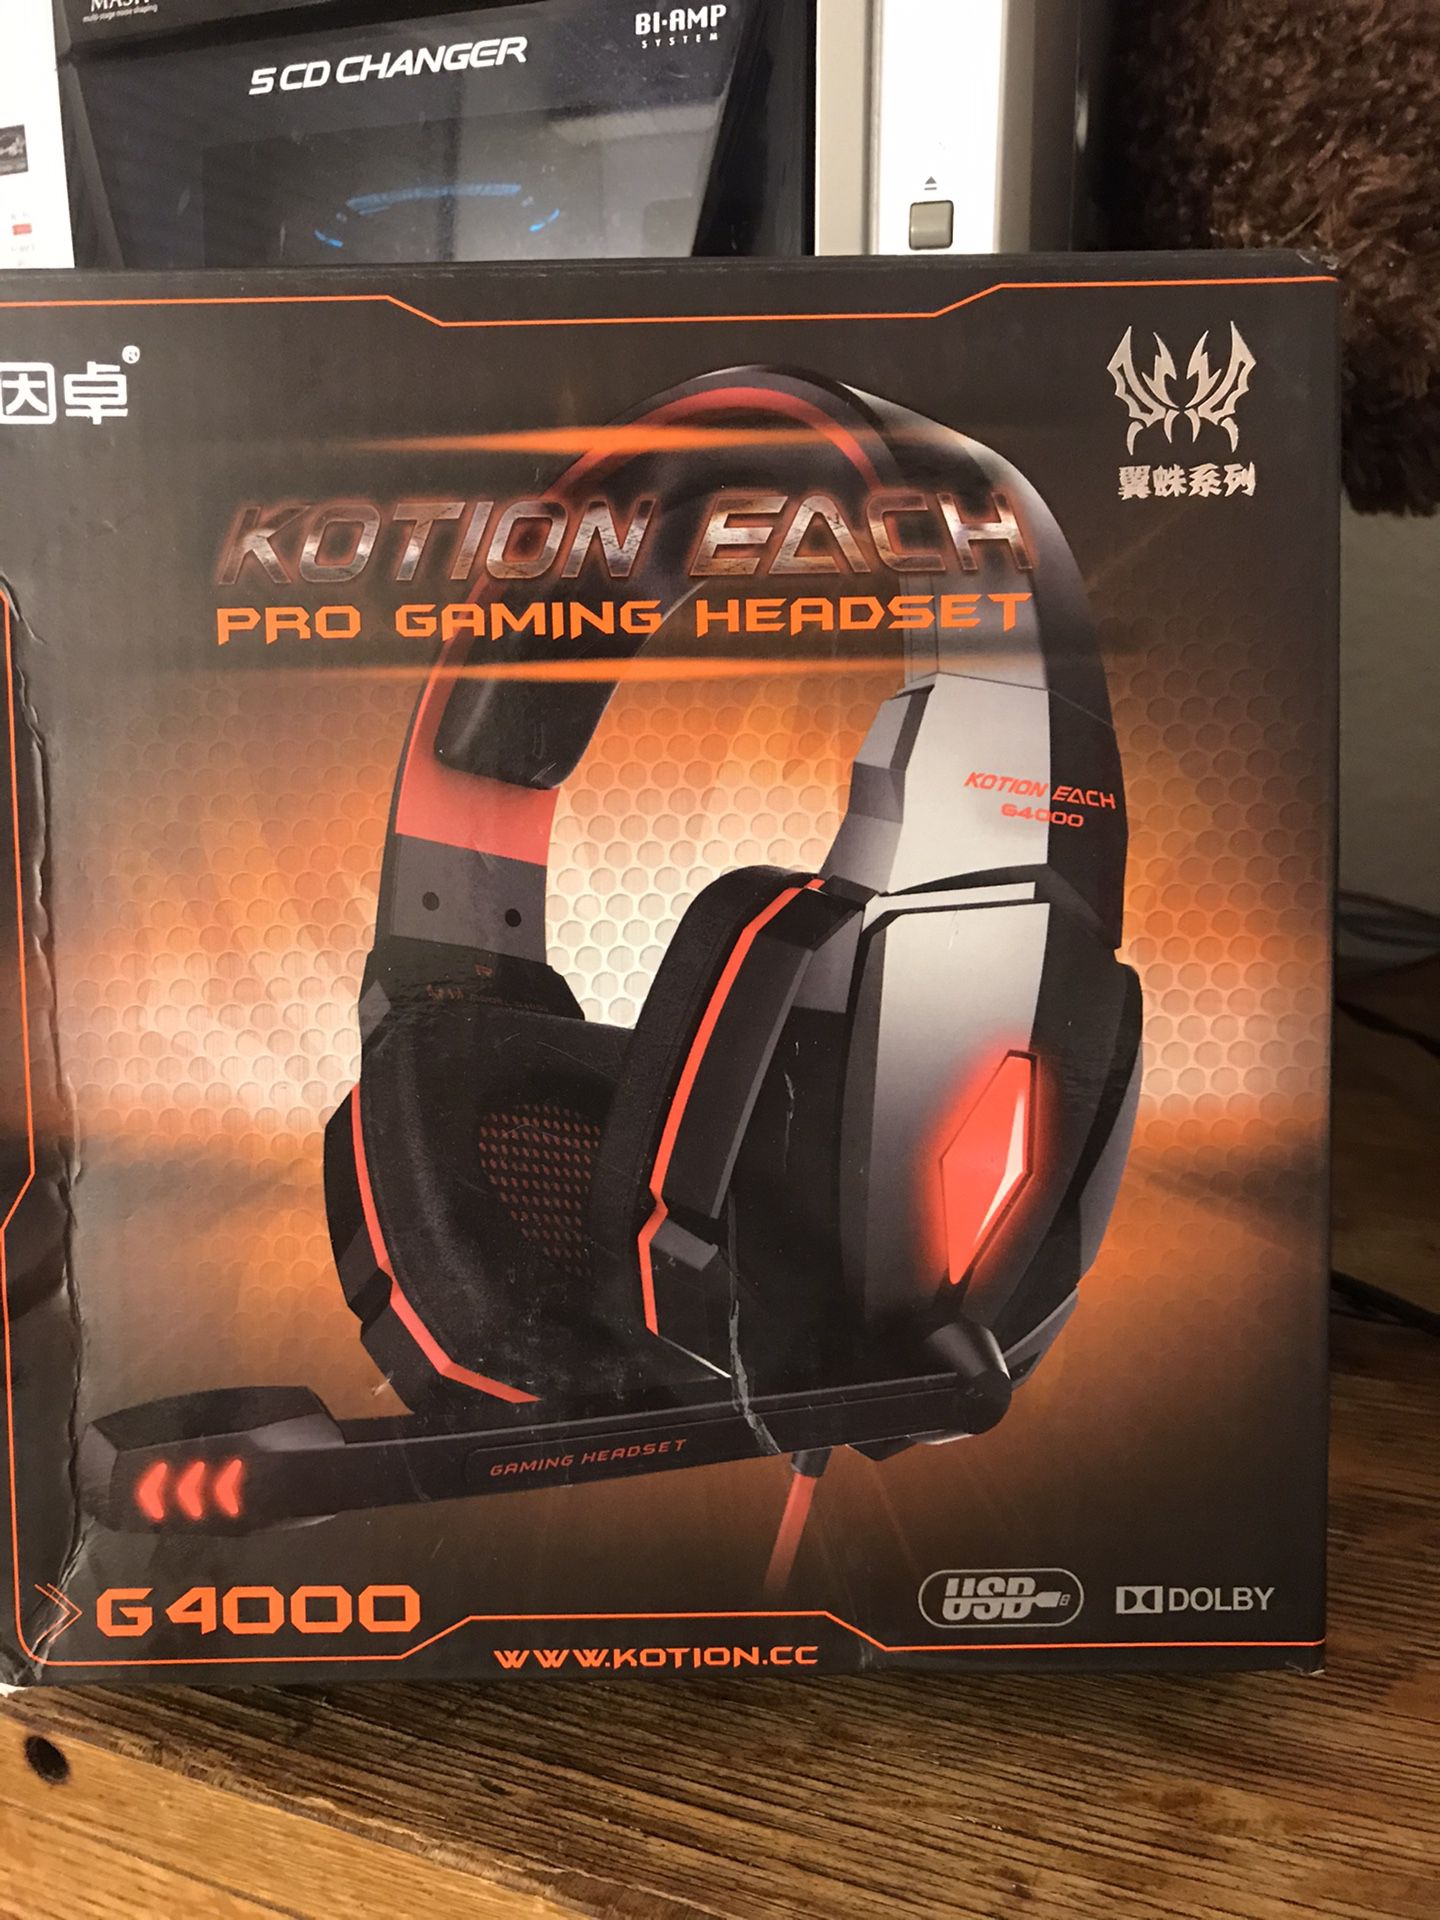 Kotion Each pro gaming headset pc 2 in Plug in &usb